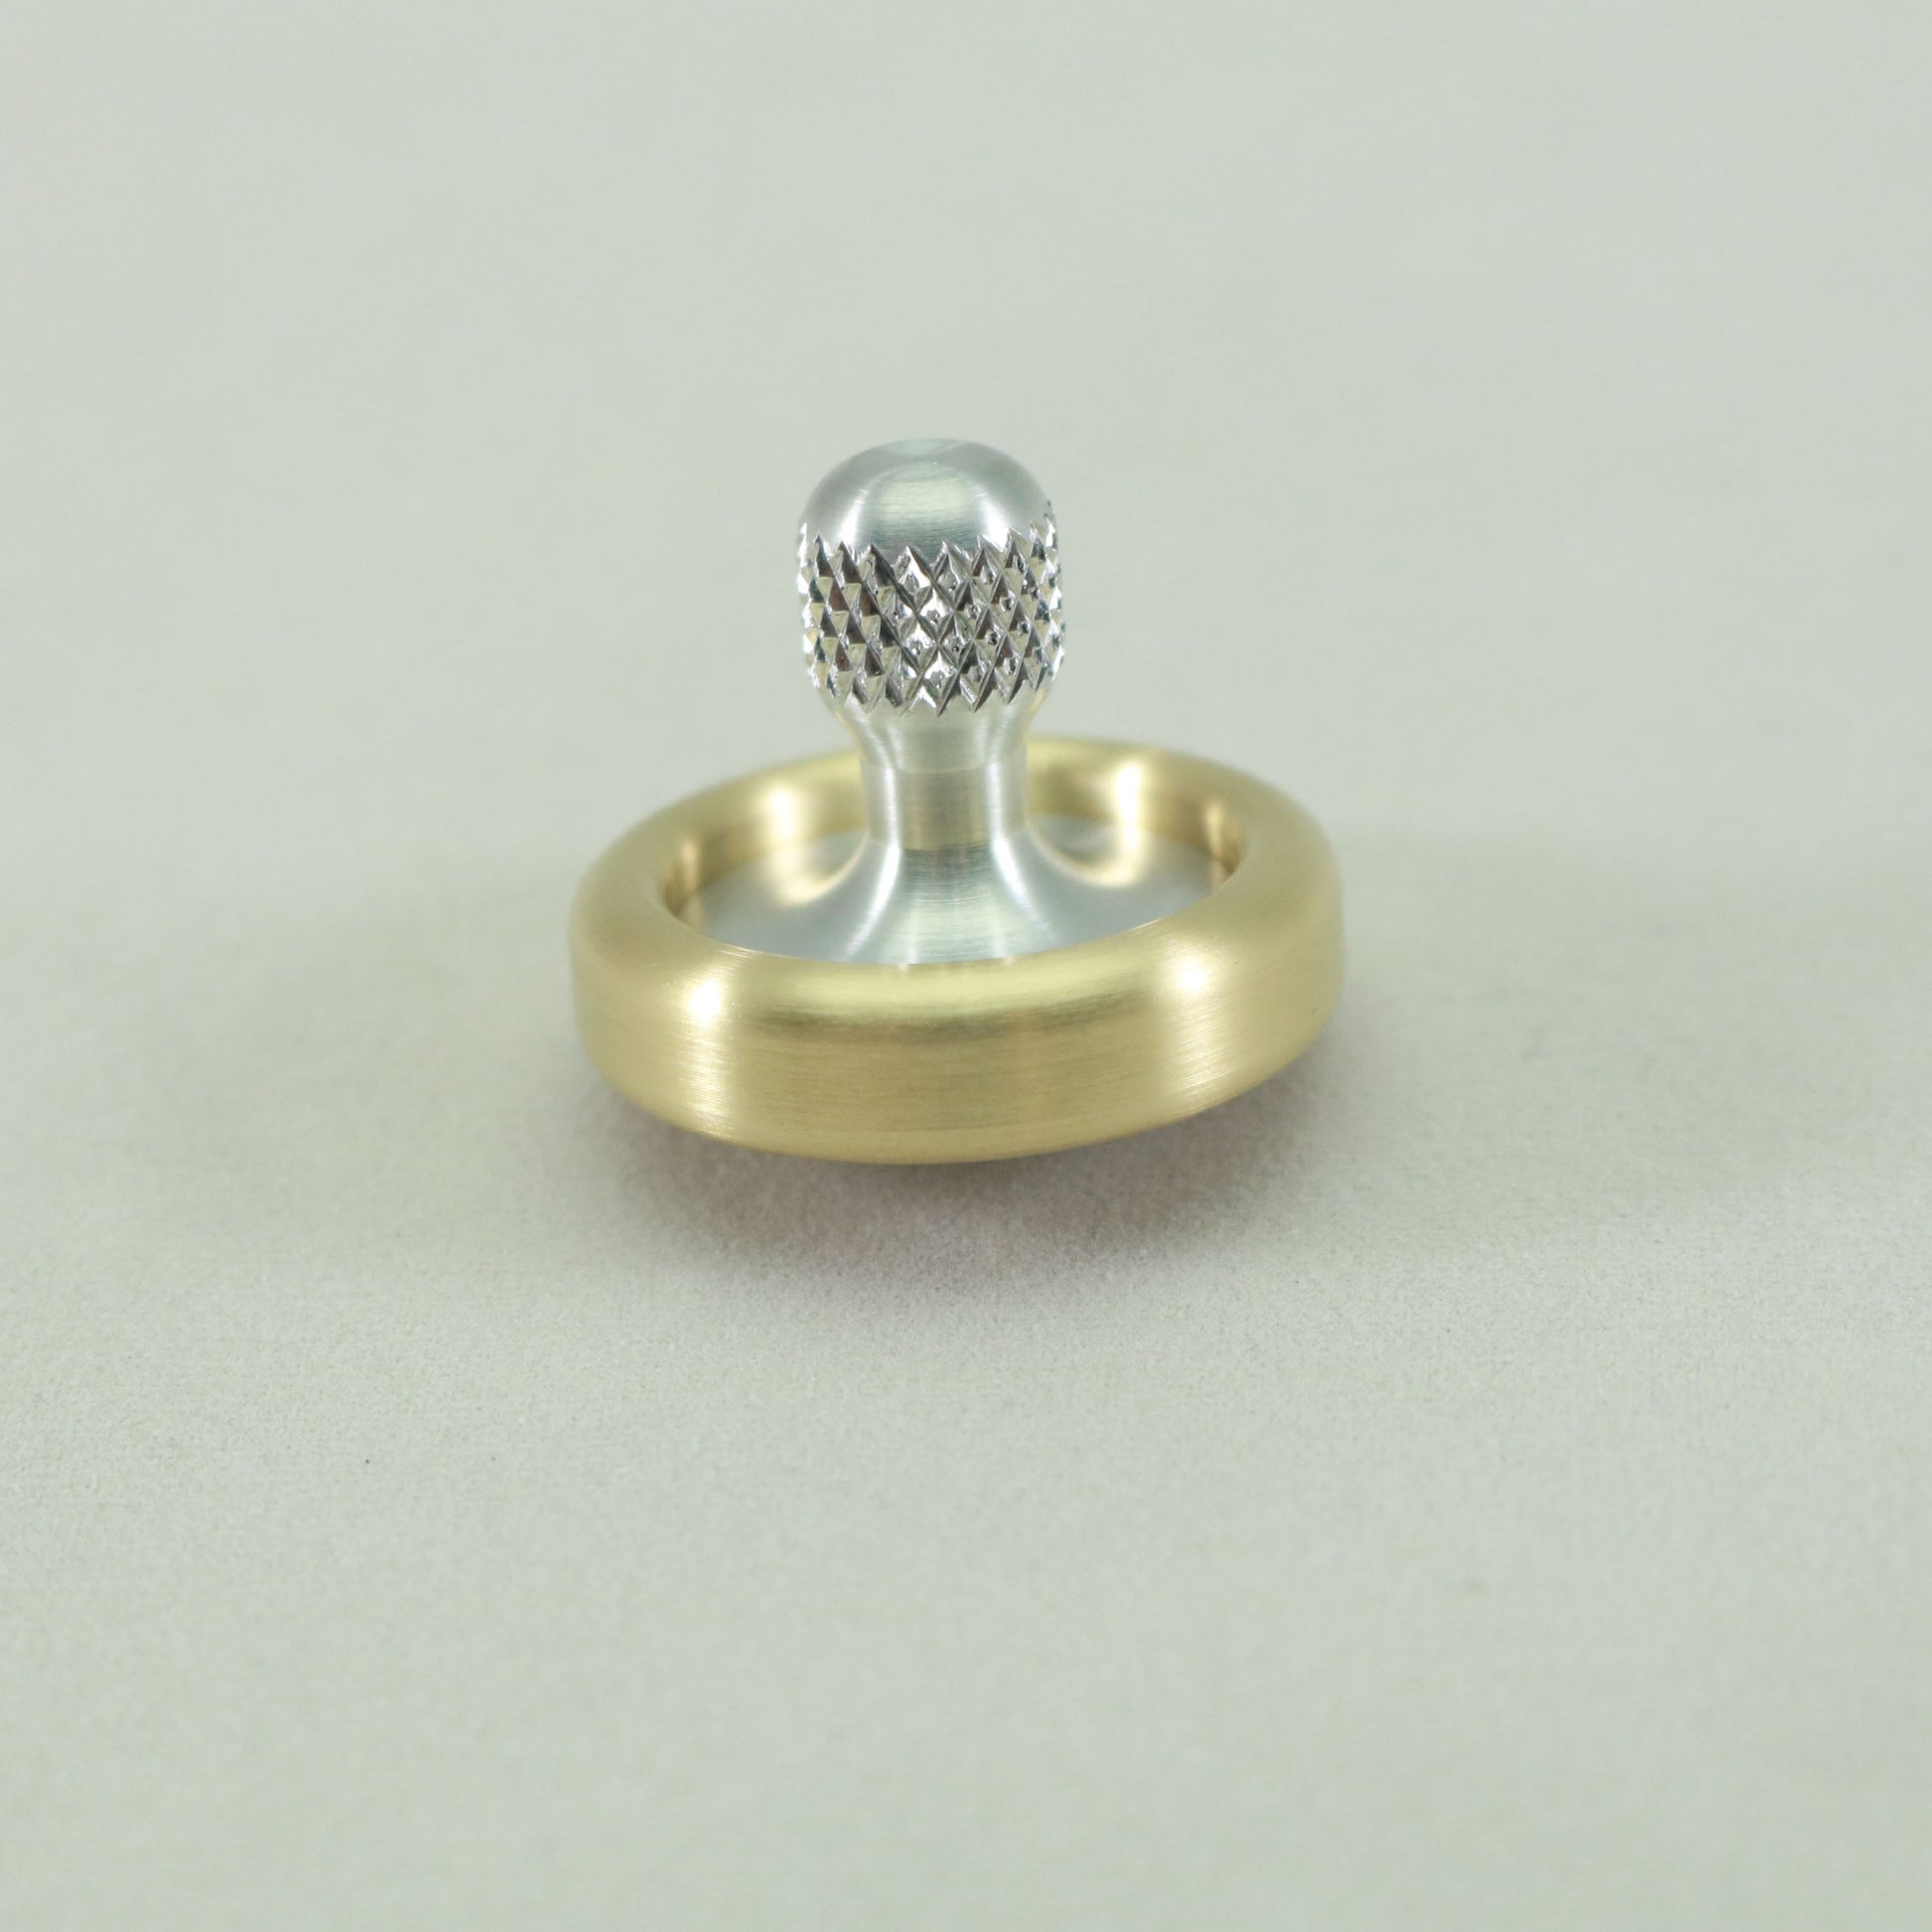 Full view of the Knurled Brass and Aluminum Dynamini Spinning Top